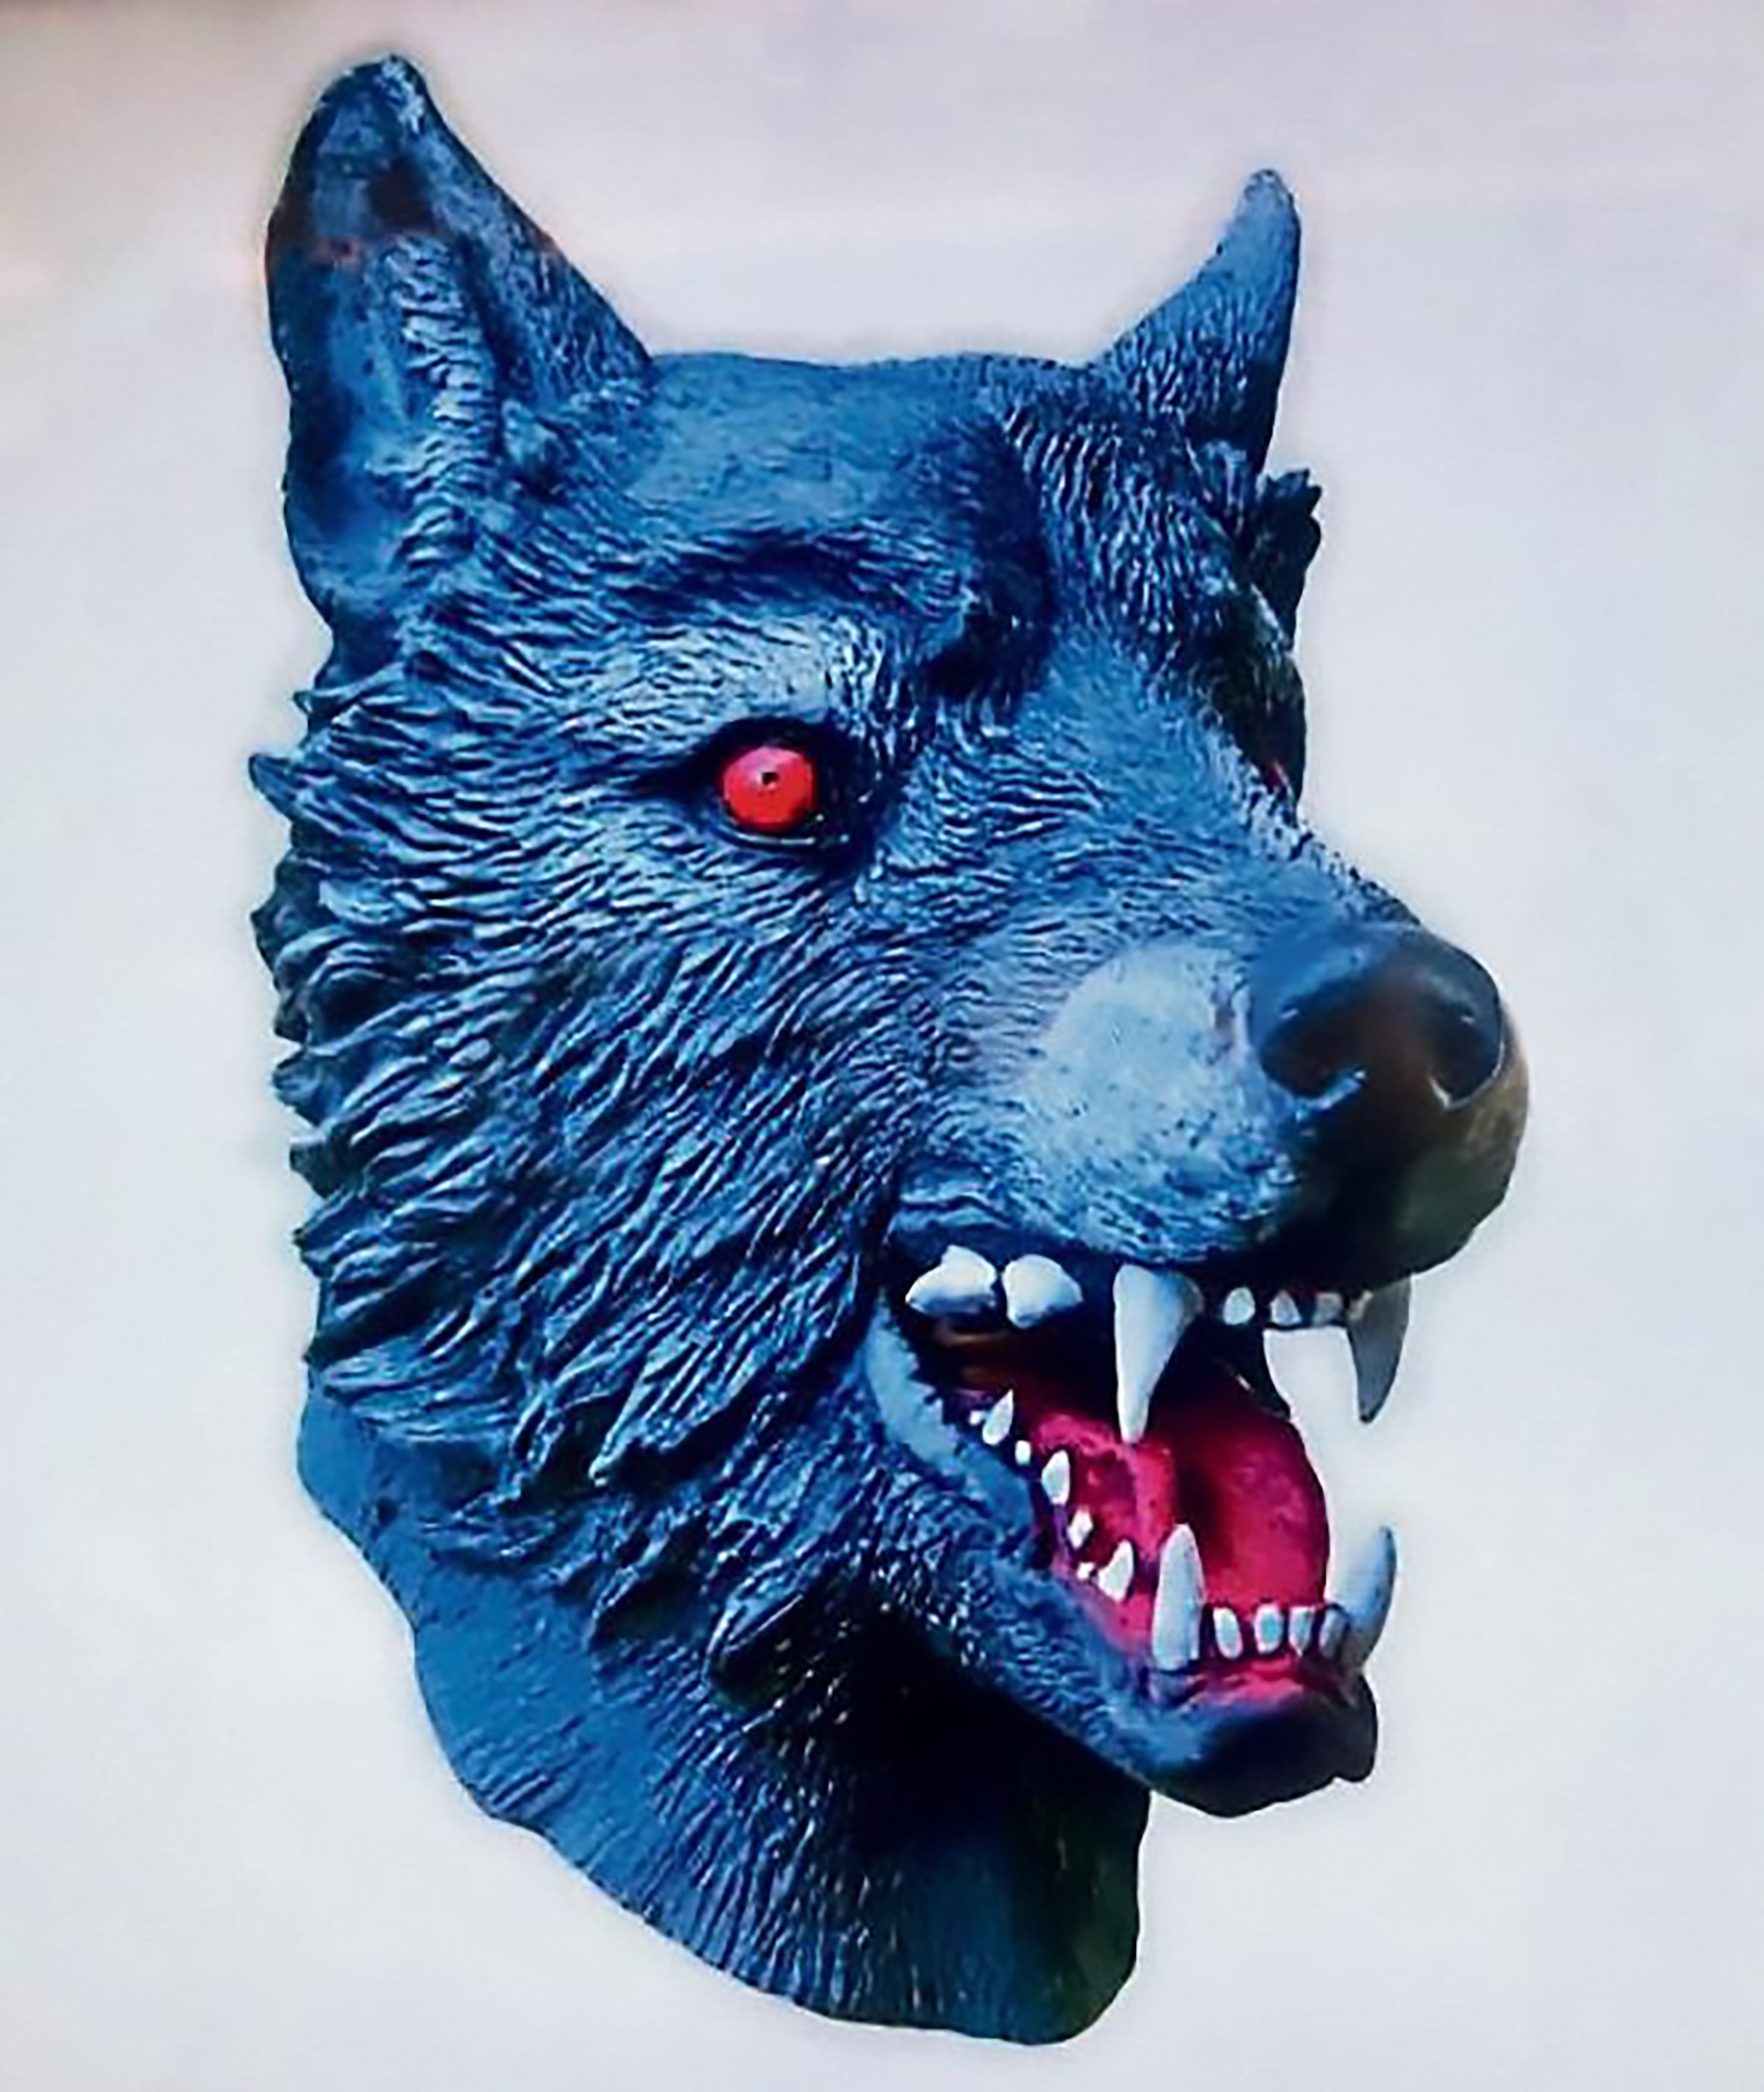 Read more about the article WOLF MASK R4PIST: Retrial Ordered For Man Who Attacked Child As Sentence Was Too Harsh